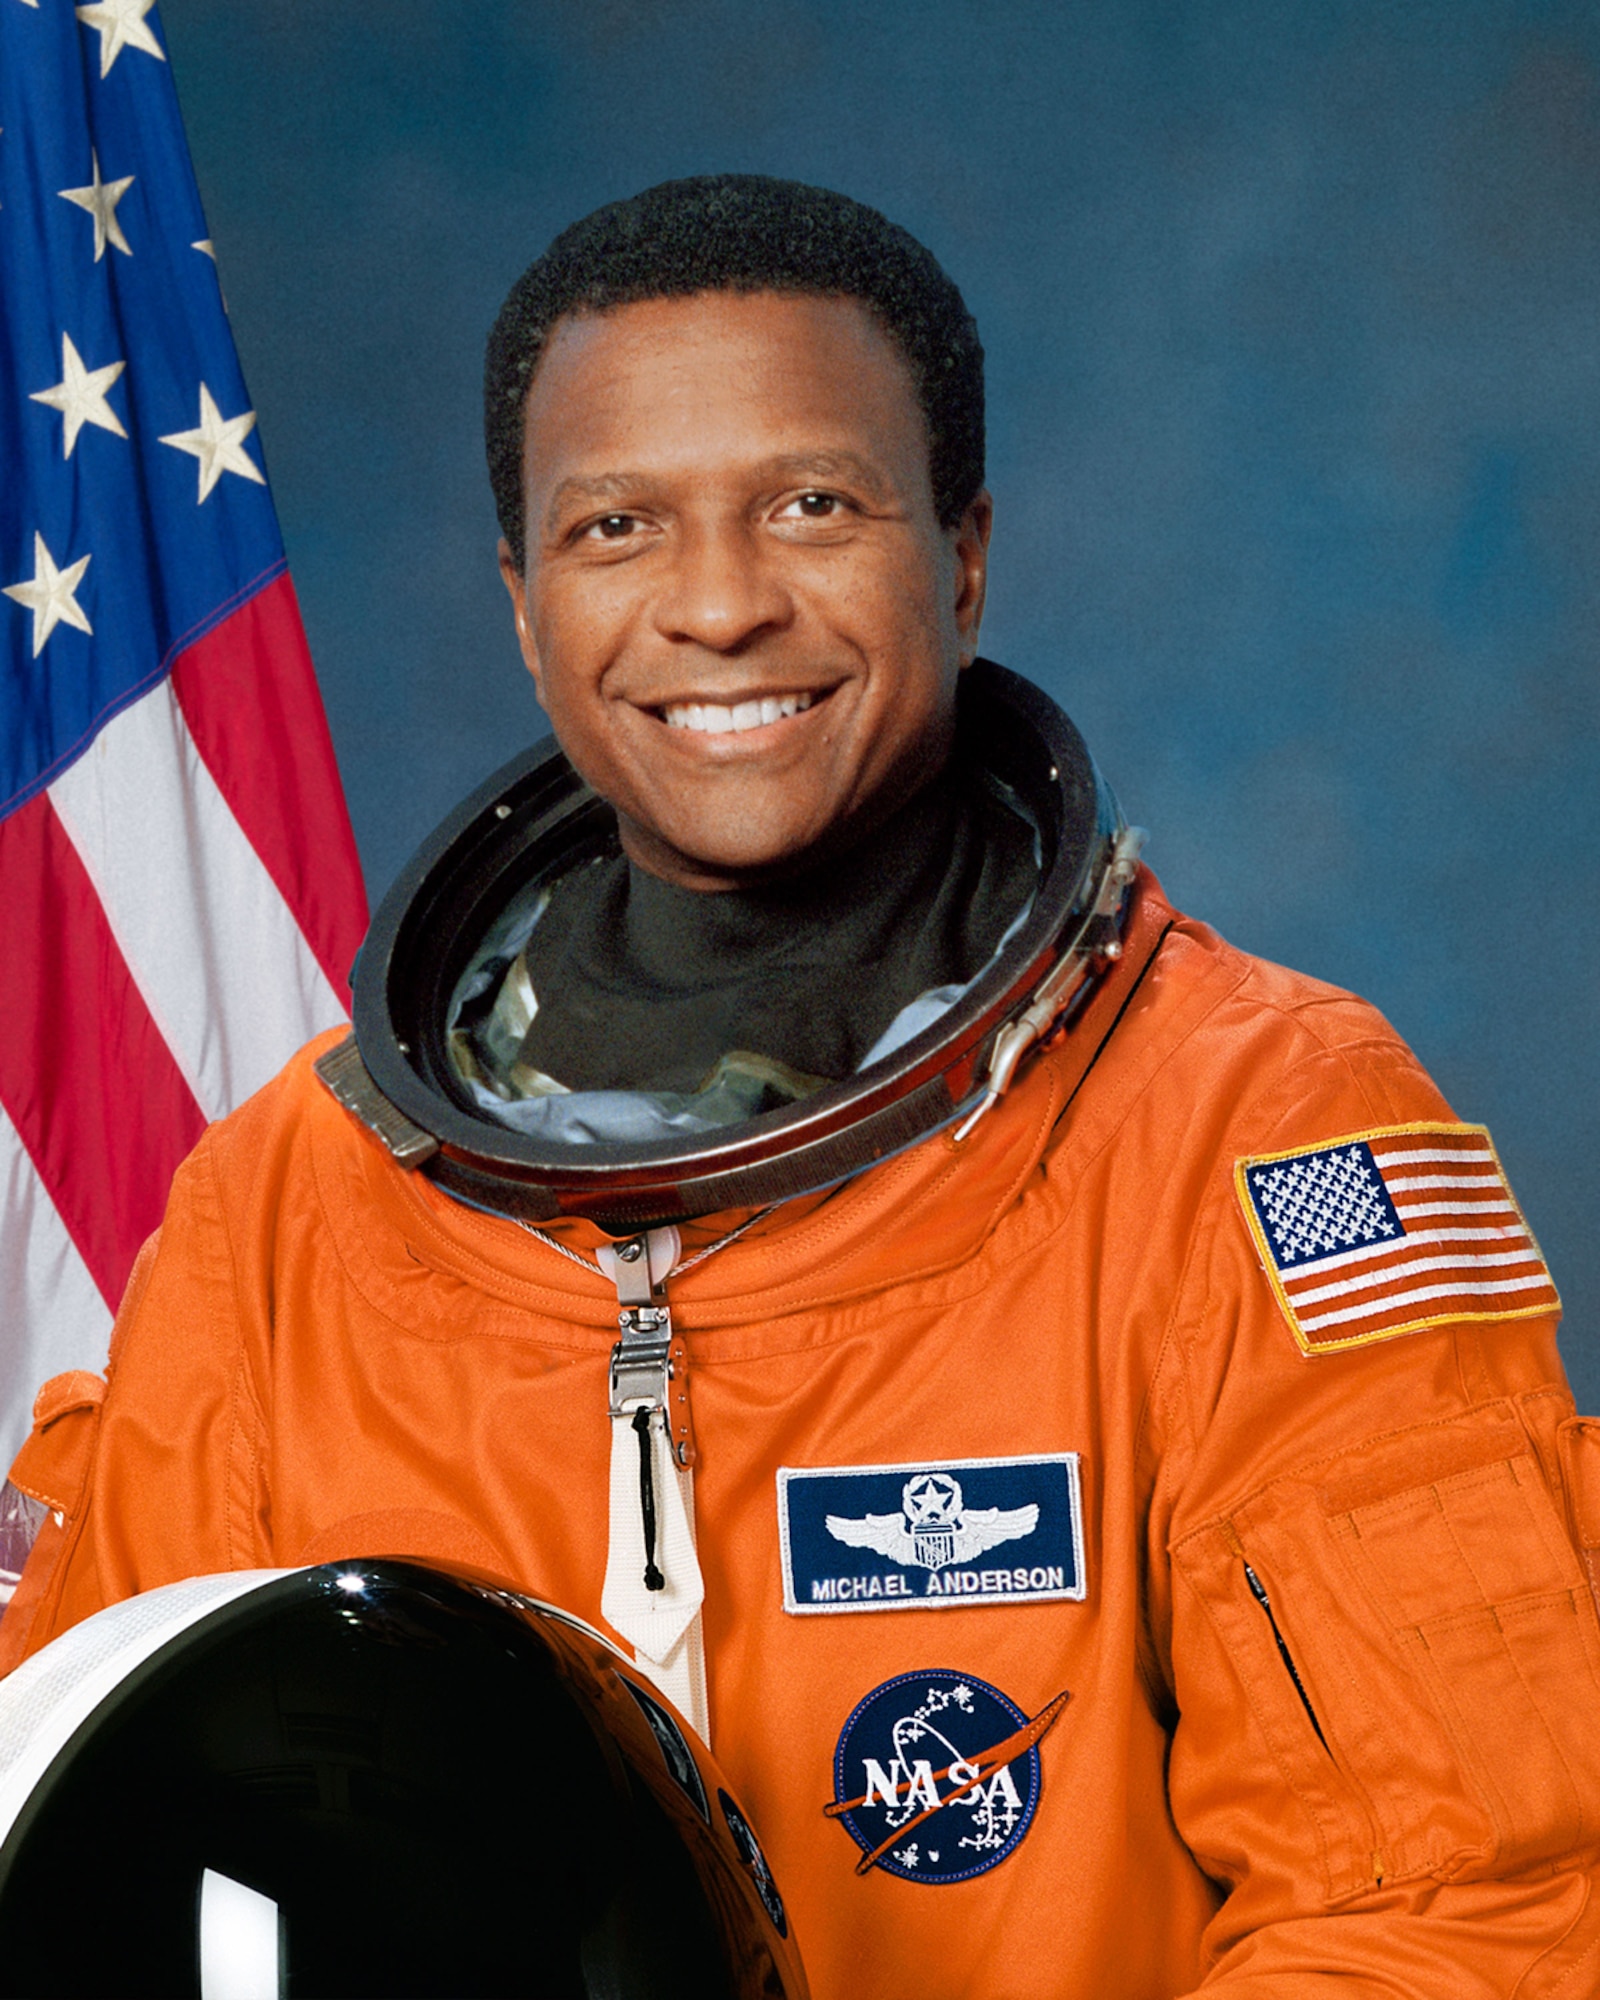 Michael P. Anderson, an African-American astronaut who died aboard the space shuttle Columbia in February 2003.